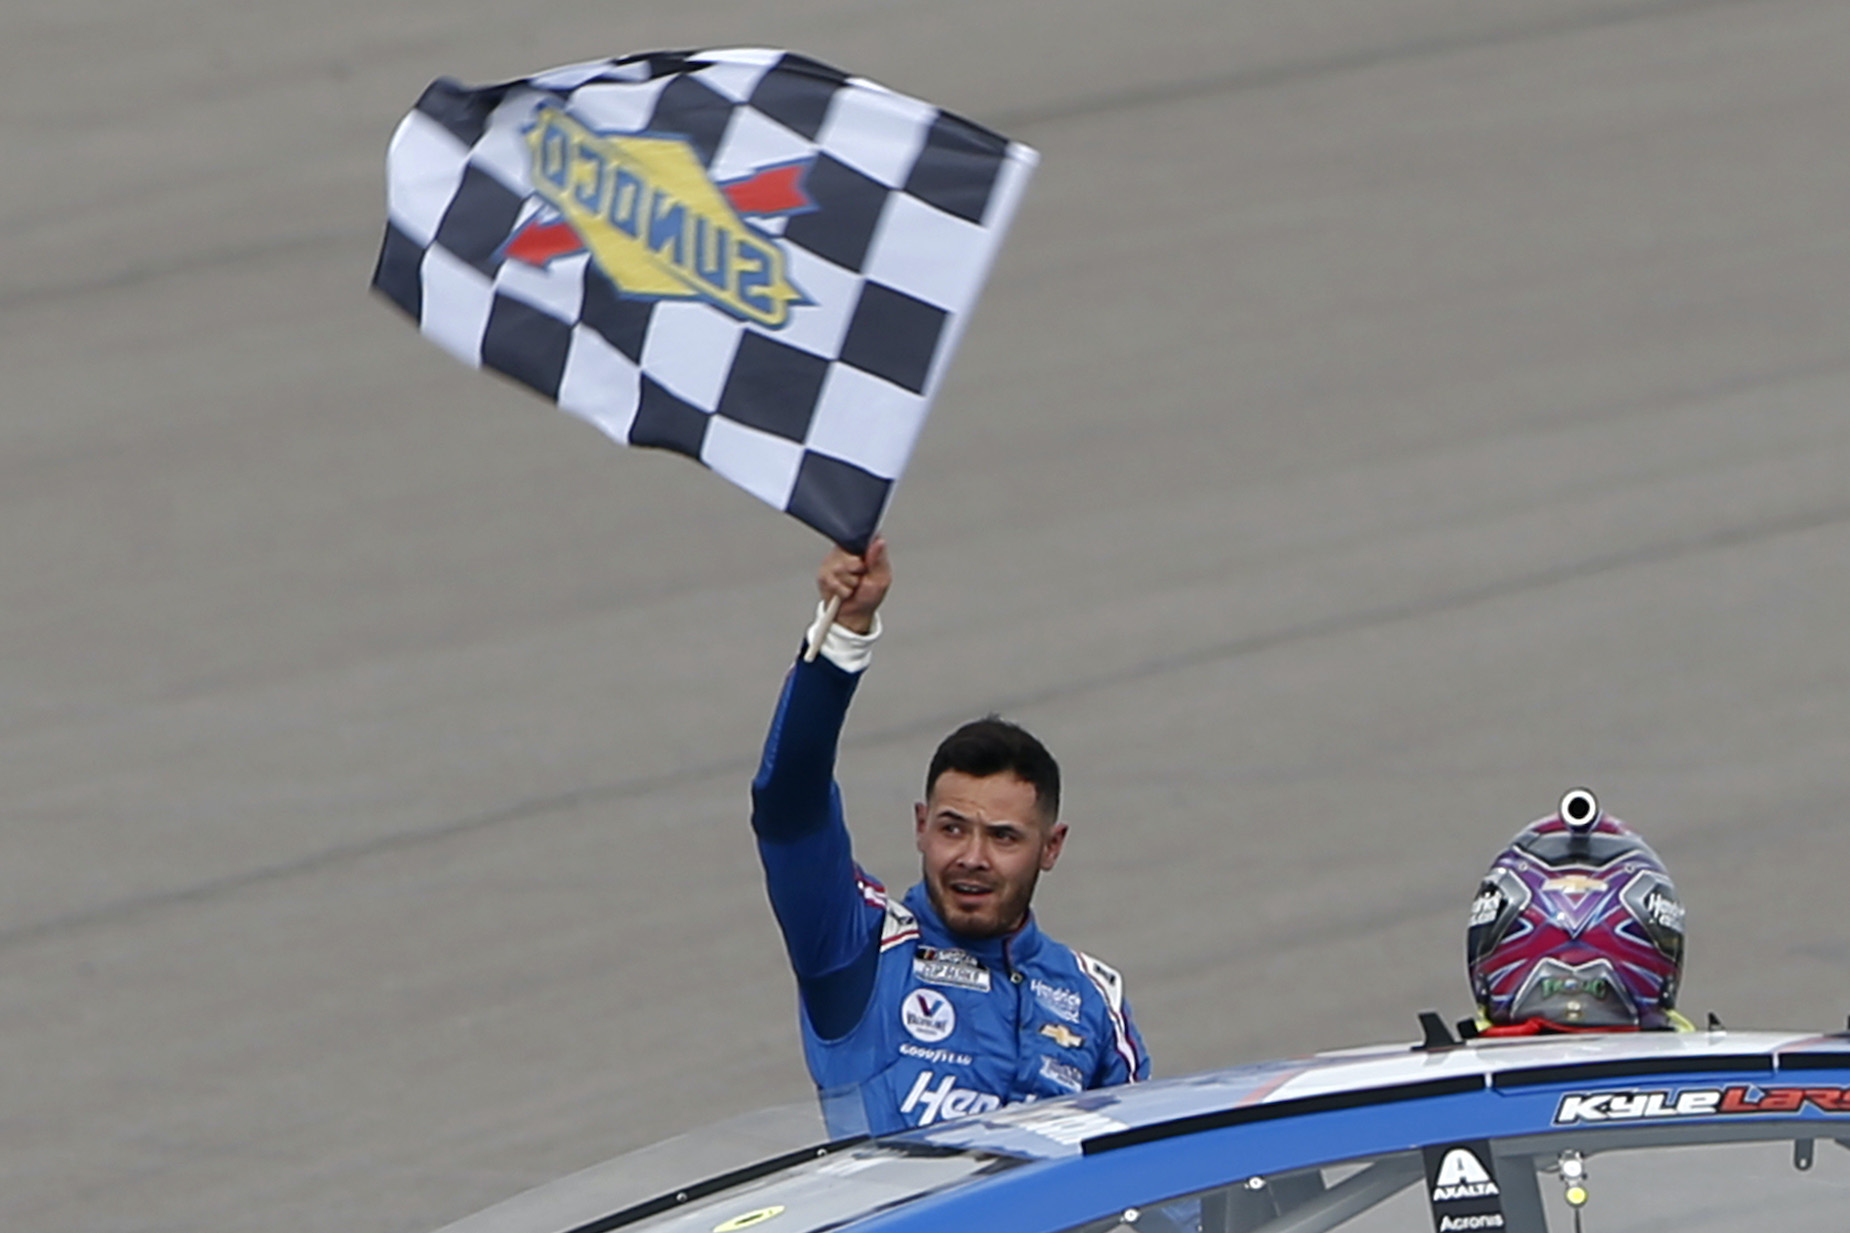 Kyle Larson waves the checkered flag after winning the 2021 NASCAR Cup Series Pennzoil 400.